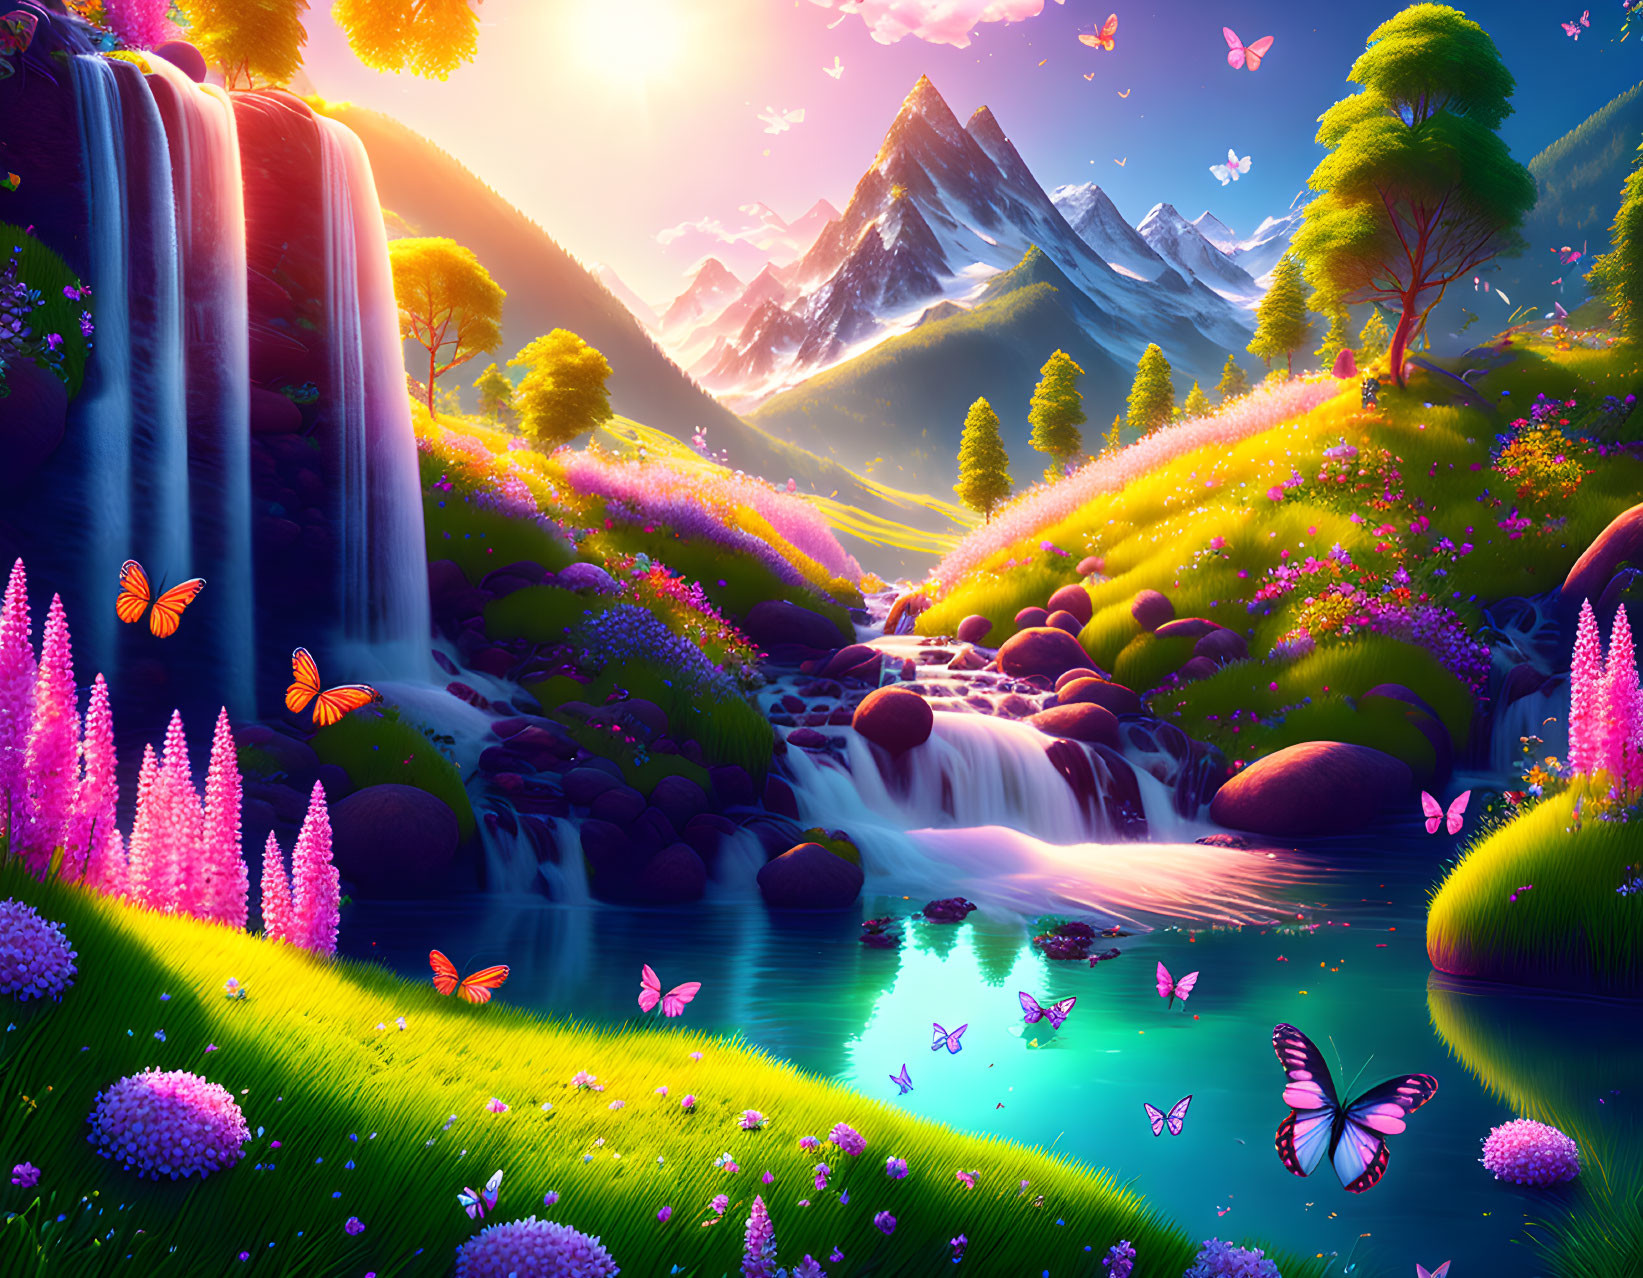 Colorful Fantasy Landscape with Waterfalls, River, Flora, Butterflies & Mountain Scenery at